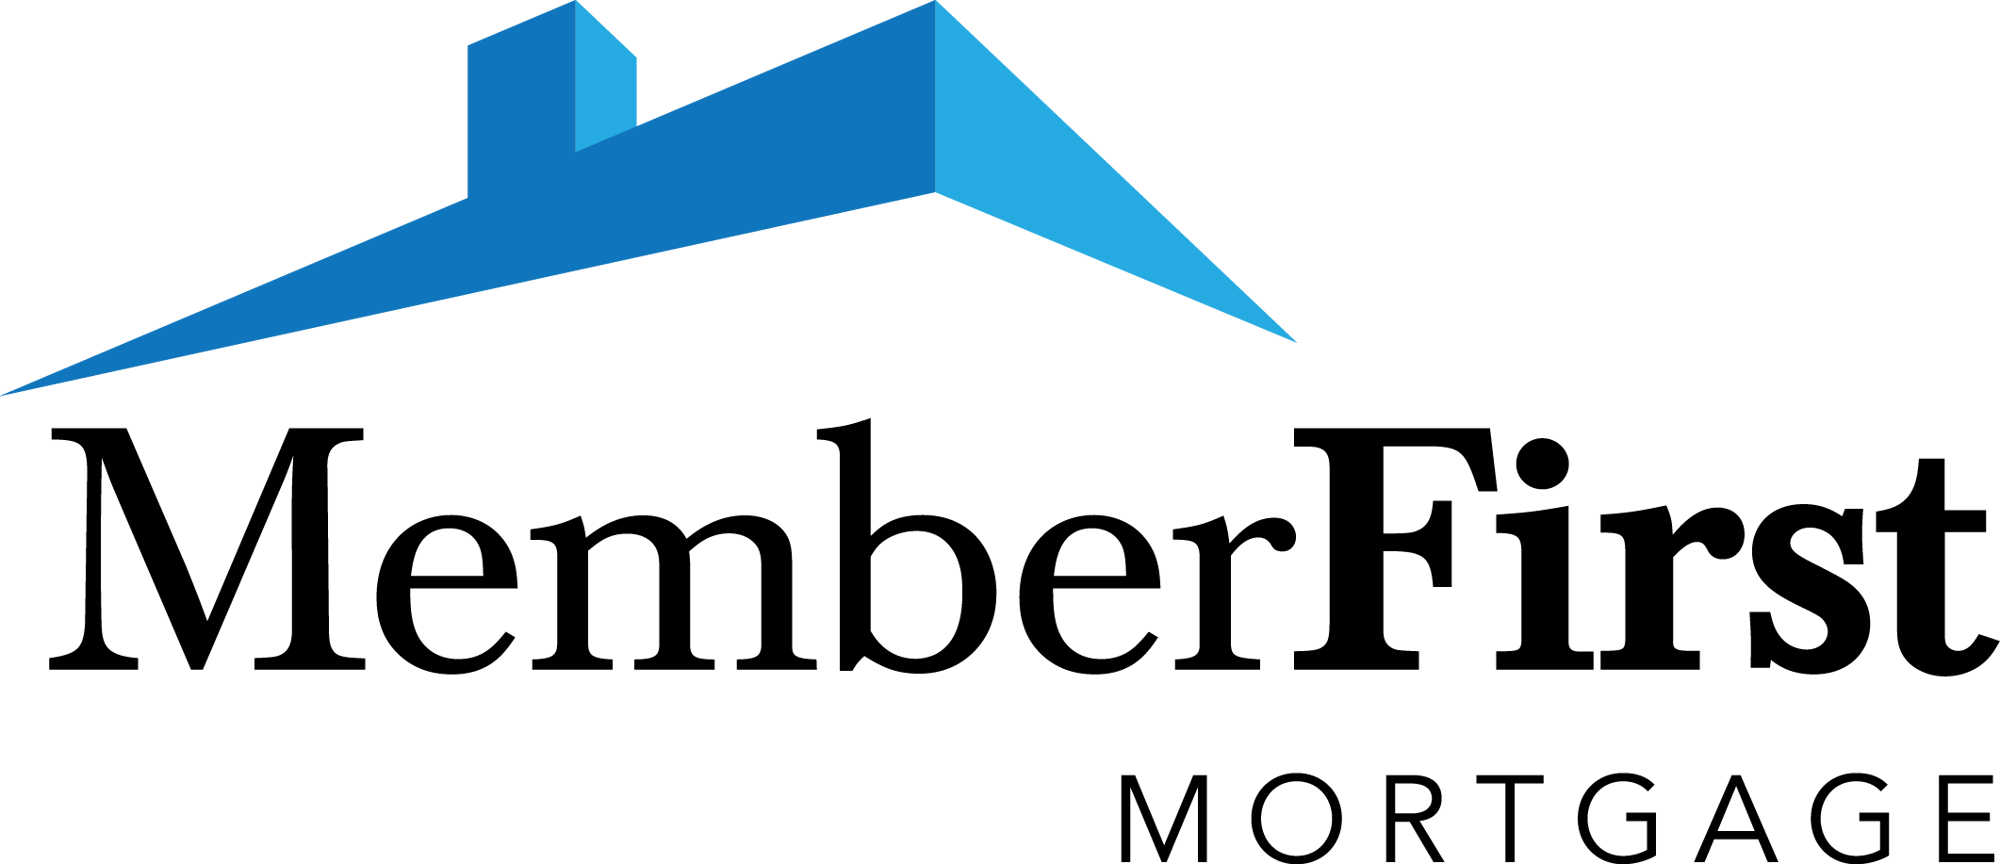 member-first-mortgage